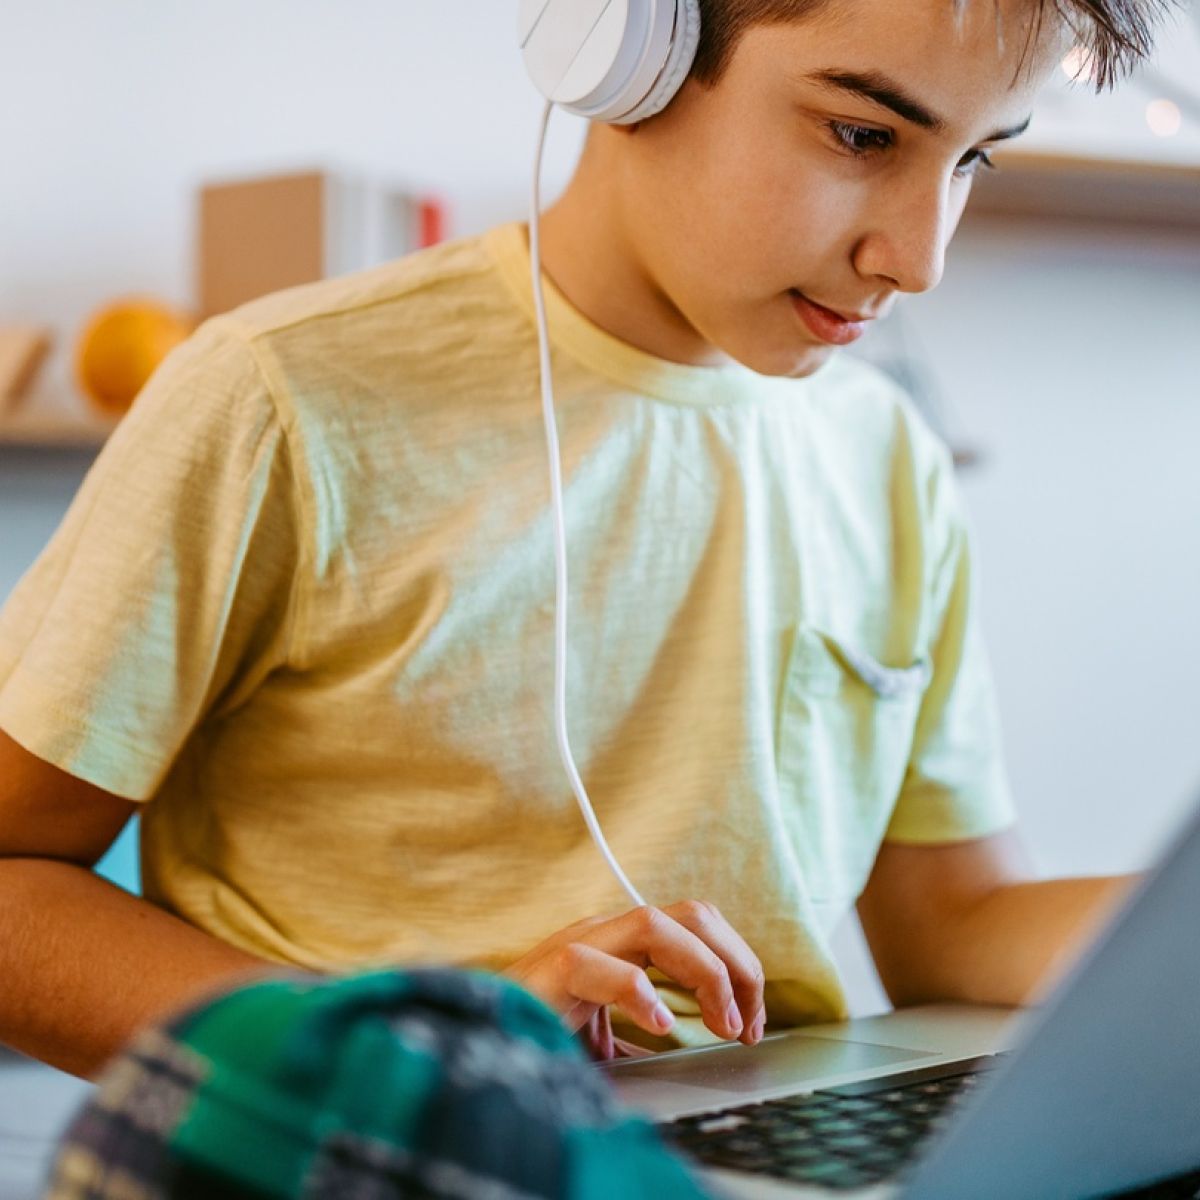 Student U Porn - My 12-year-old son is looking up porn. What should I do?'